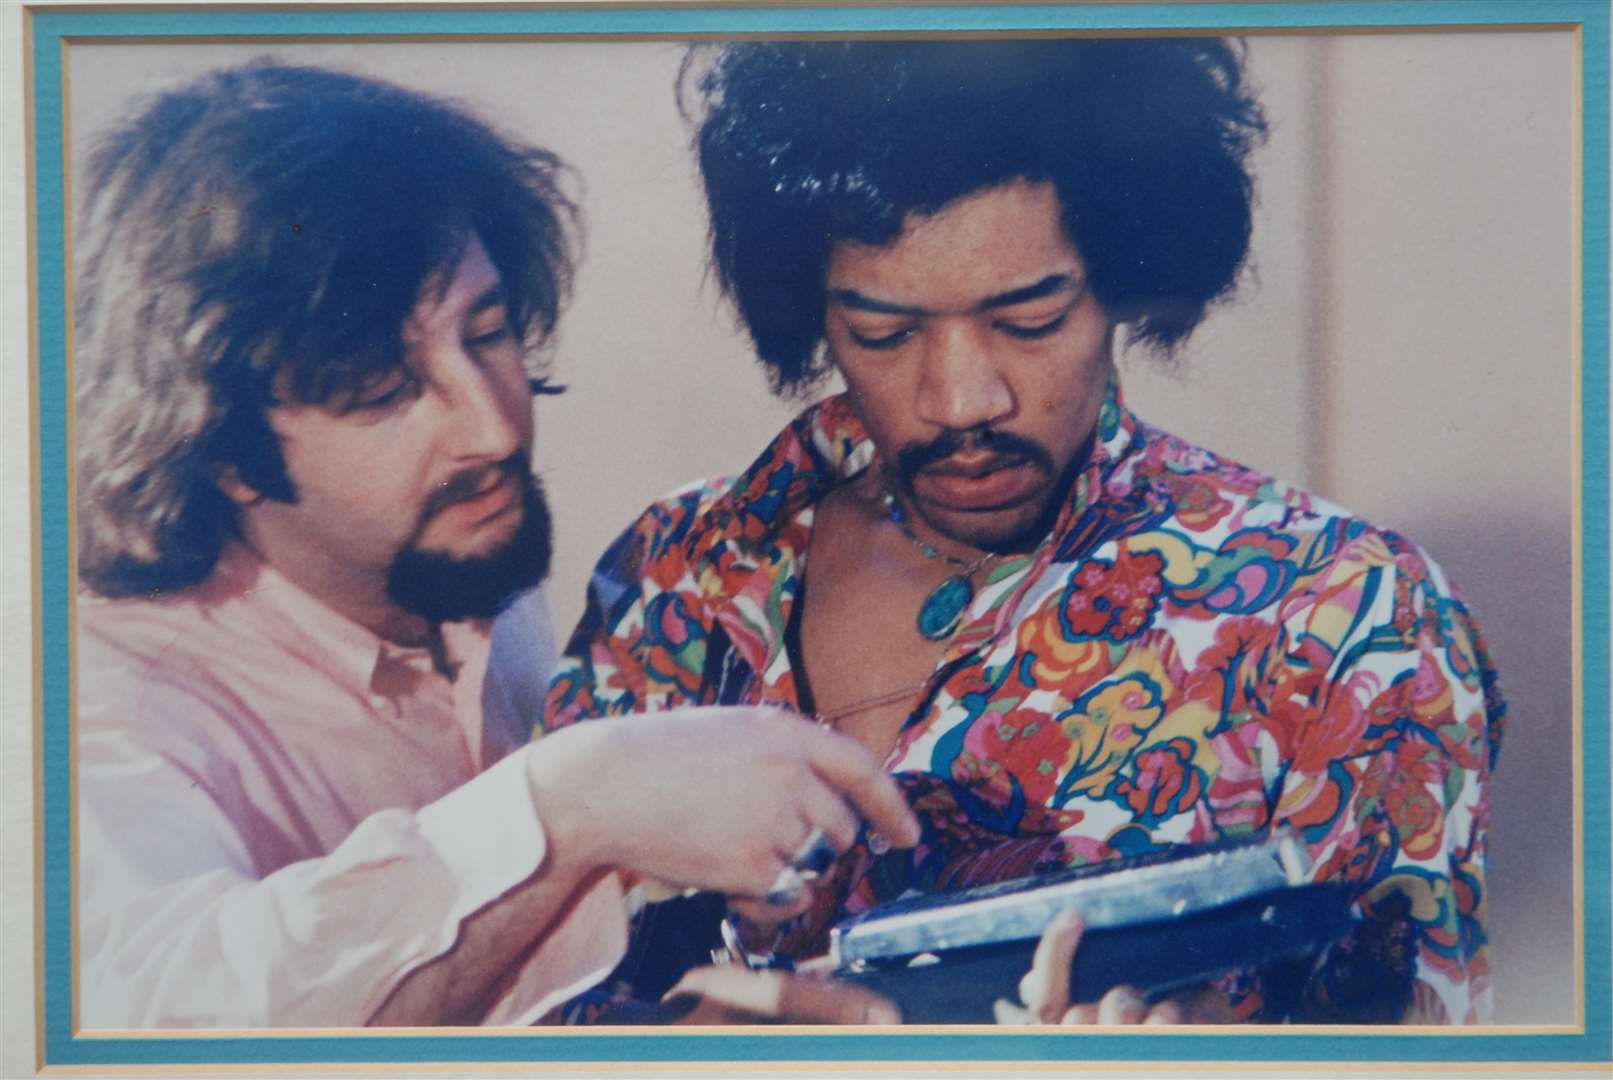 Gerry Stickells from Lydd Lifetime Award for music. with Jimmy Hendrix (GERRY STARTED INTHE BUSINESS AT THE AGE OF 22) picture by Barry Duffield Gerry started in the business at the age of 22 (7747706)